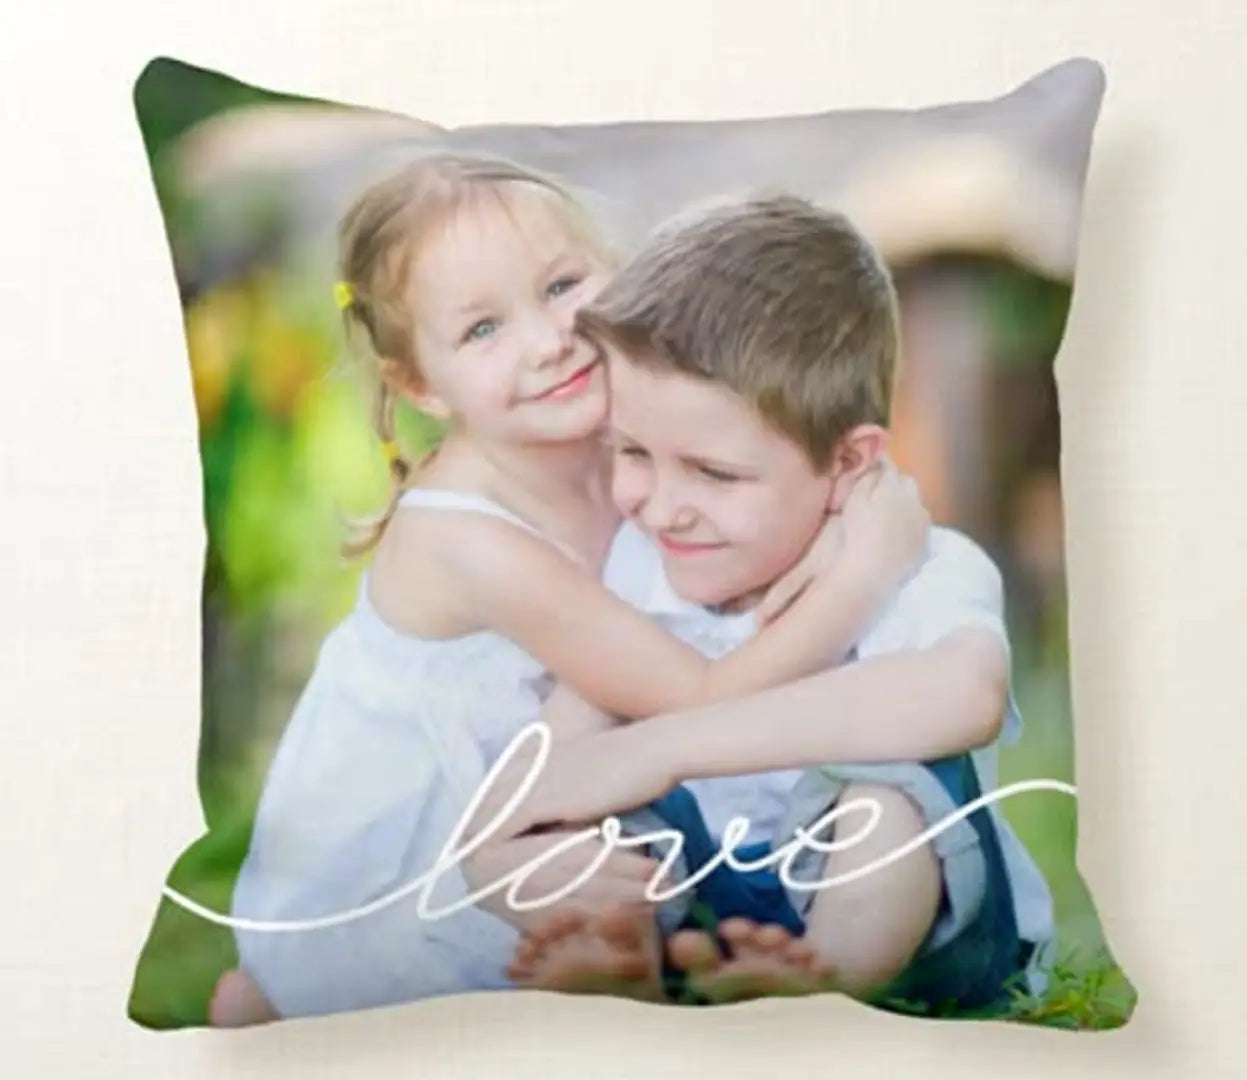 FRIENDSKART.in Free! Free! Personalized / Customized Cushion Cover with Filler, 12X12 ONE Side, Surprised Gift for Love One Printed, Best Gift Item Any Occasion, (1 Cushion Covers and 1 Filler)